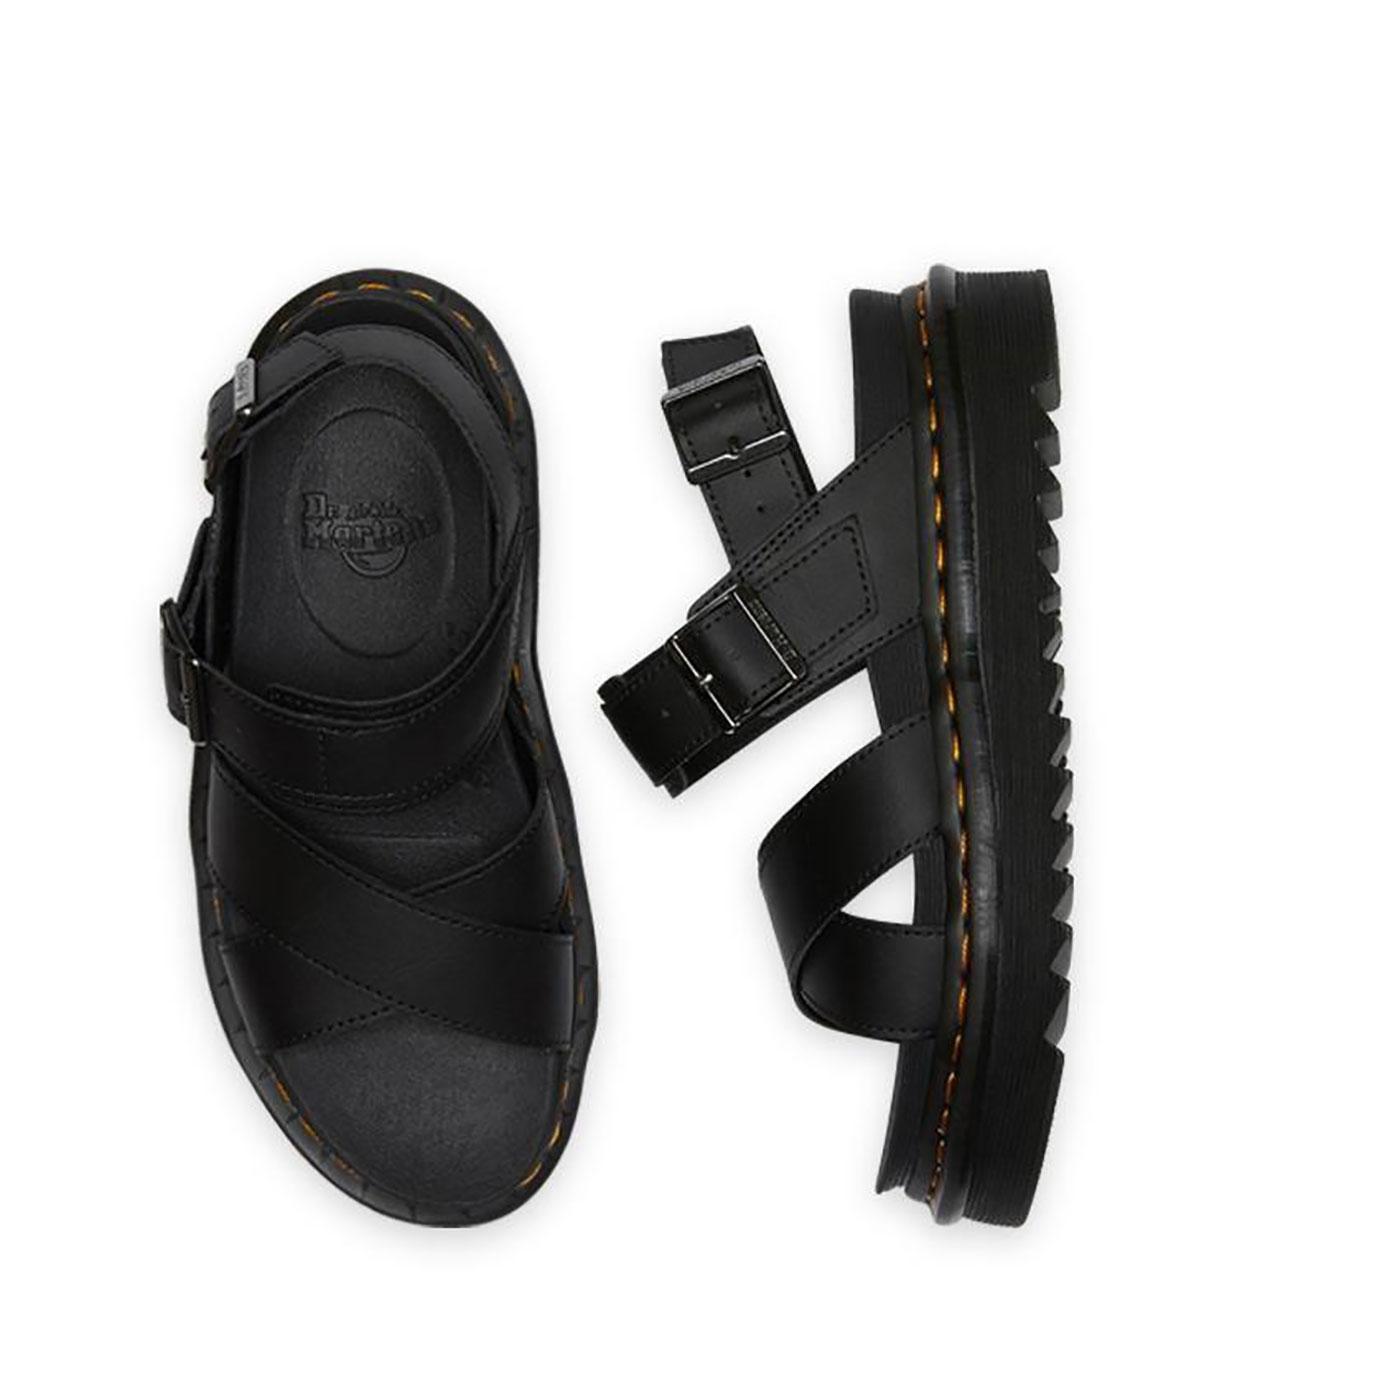 DR MARTENS Voss II Womens Hydro Leather Sandals in Black